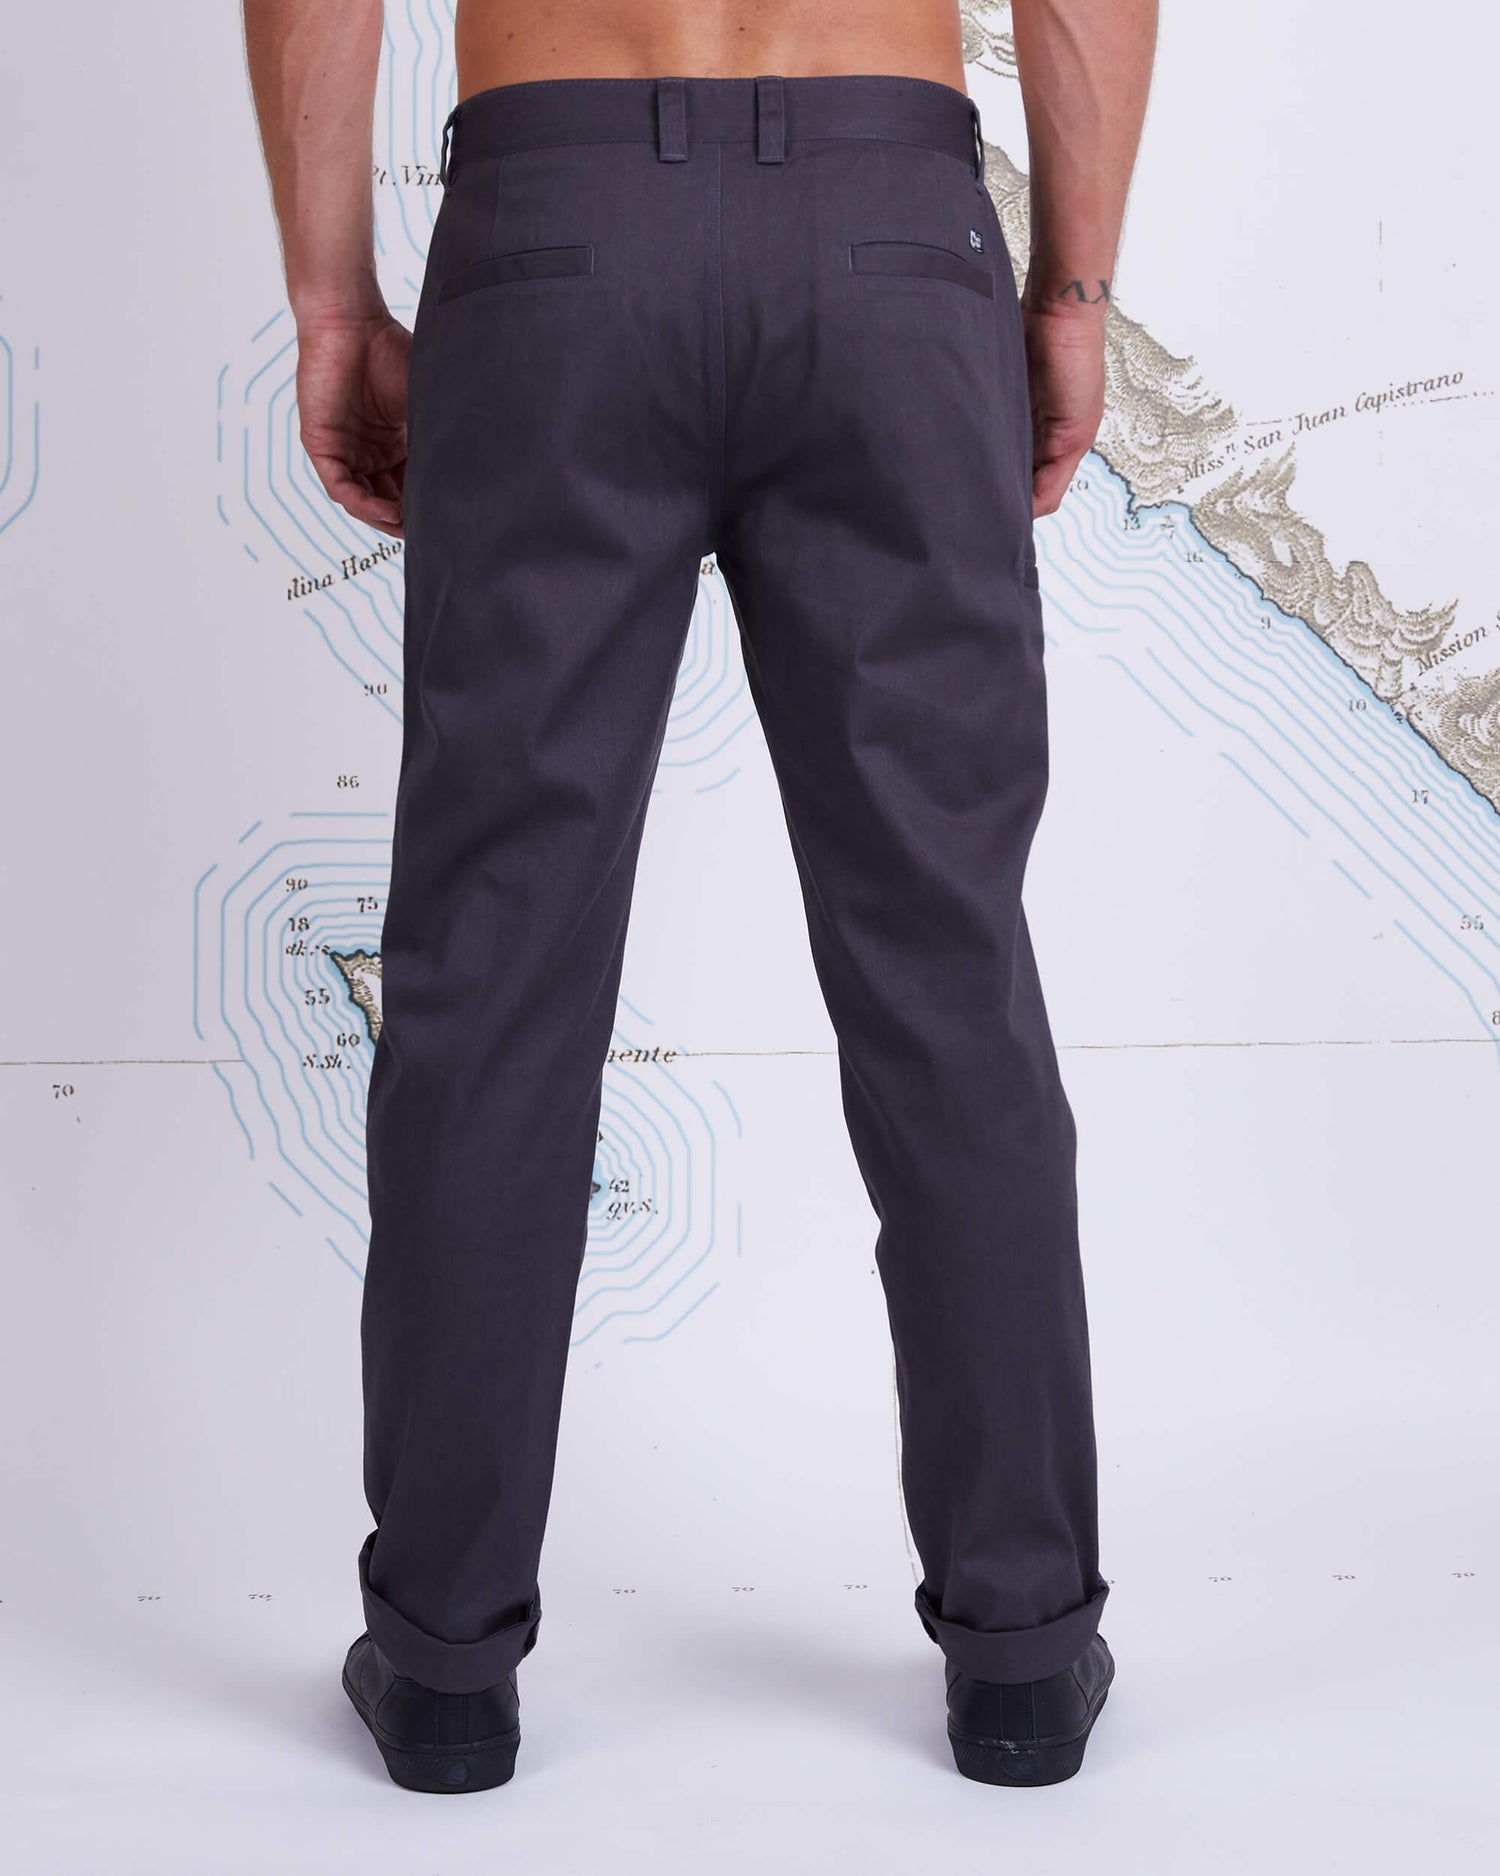 Salty Crew Hommes - Deckhand Charcoal Pant